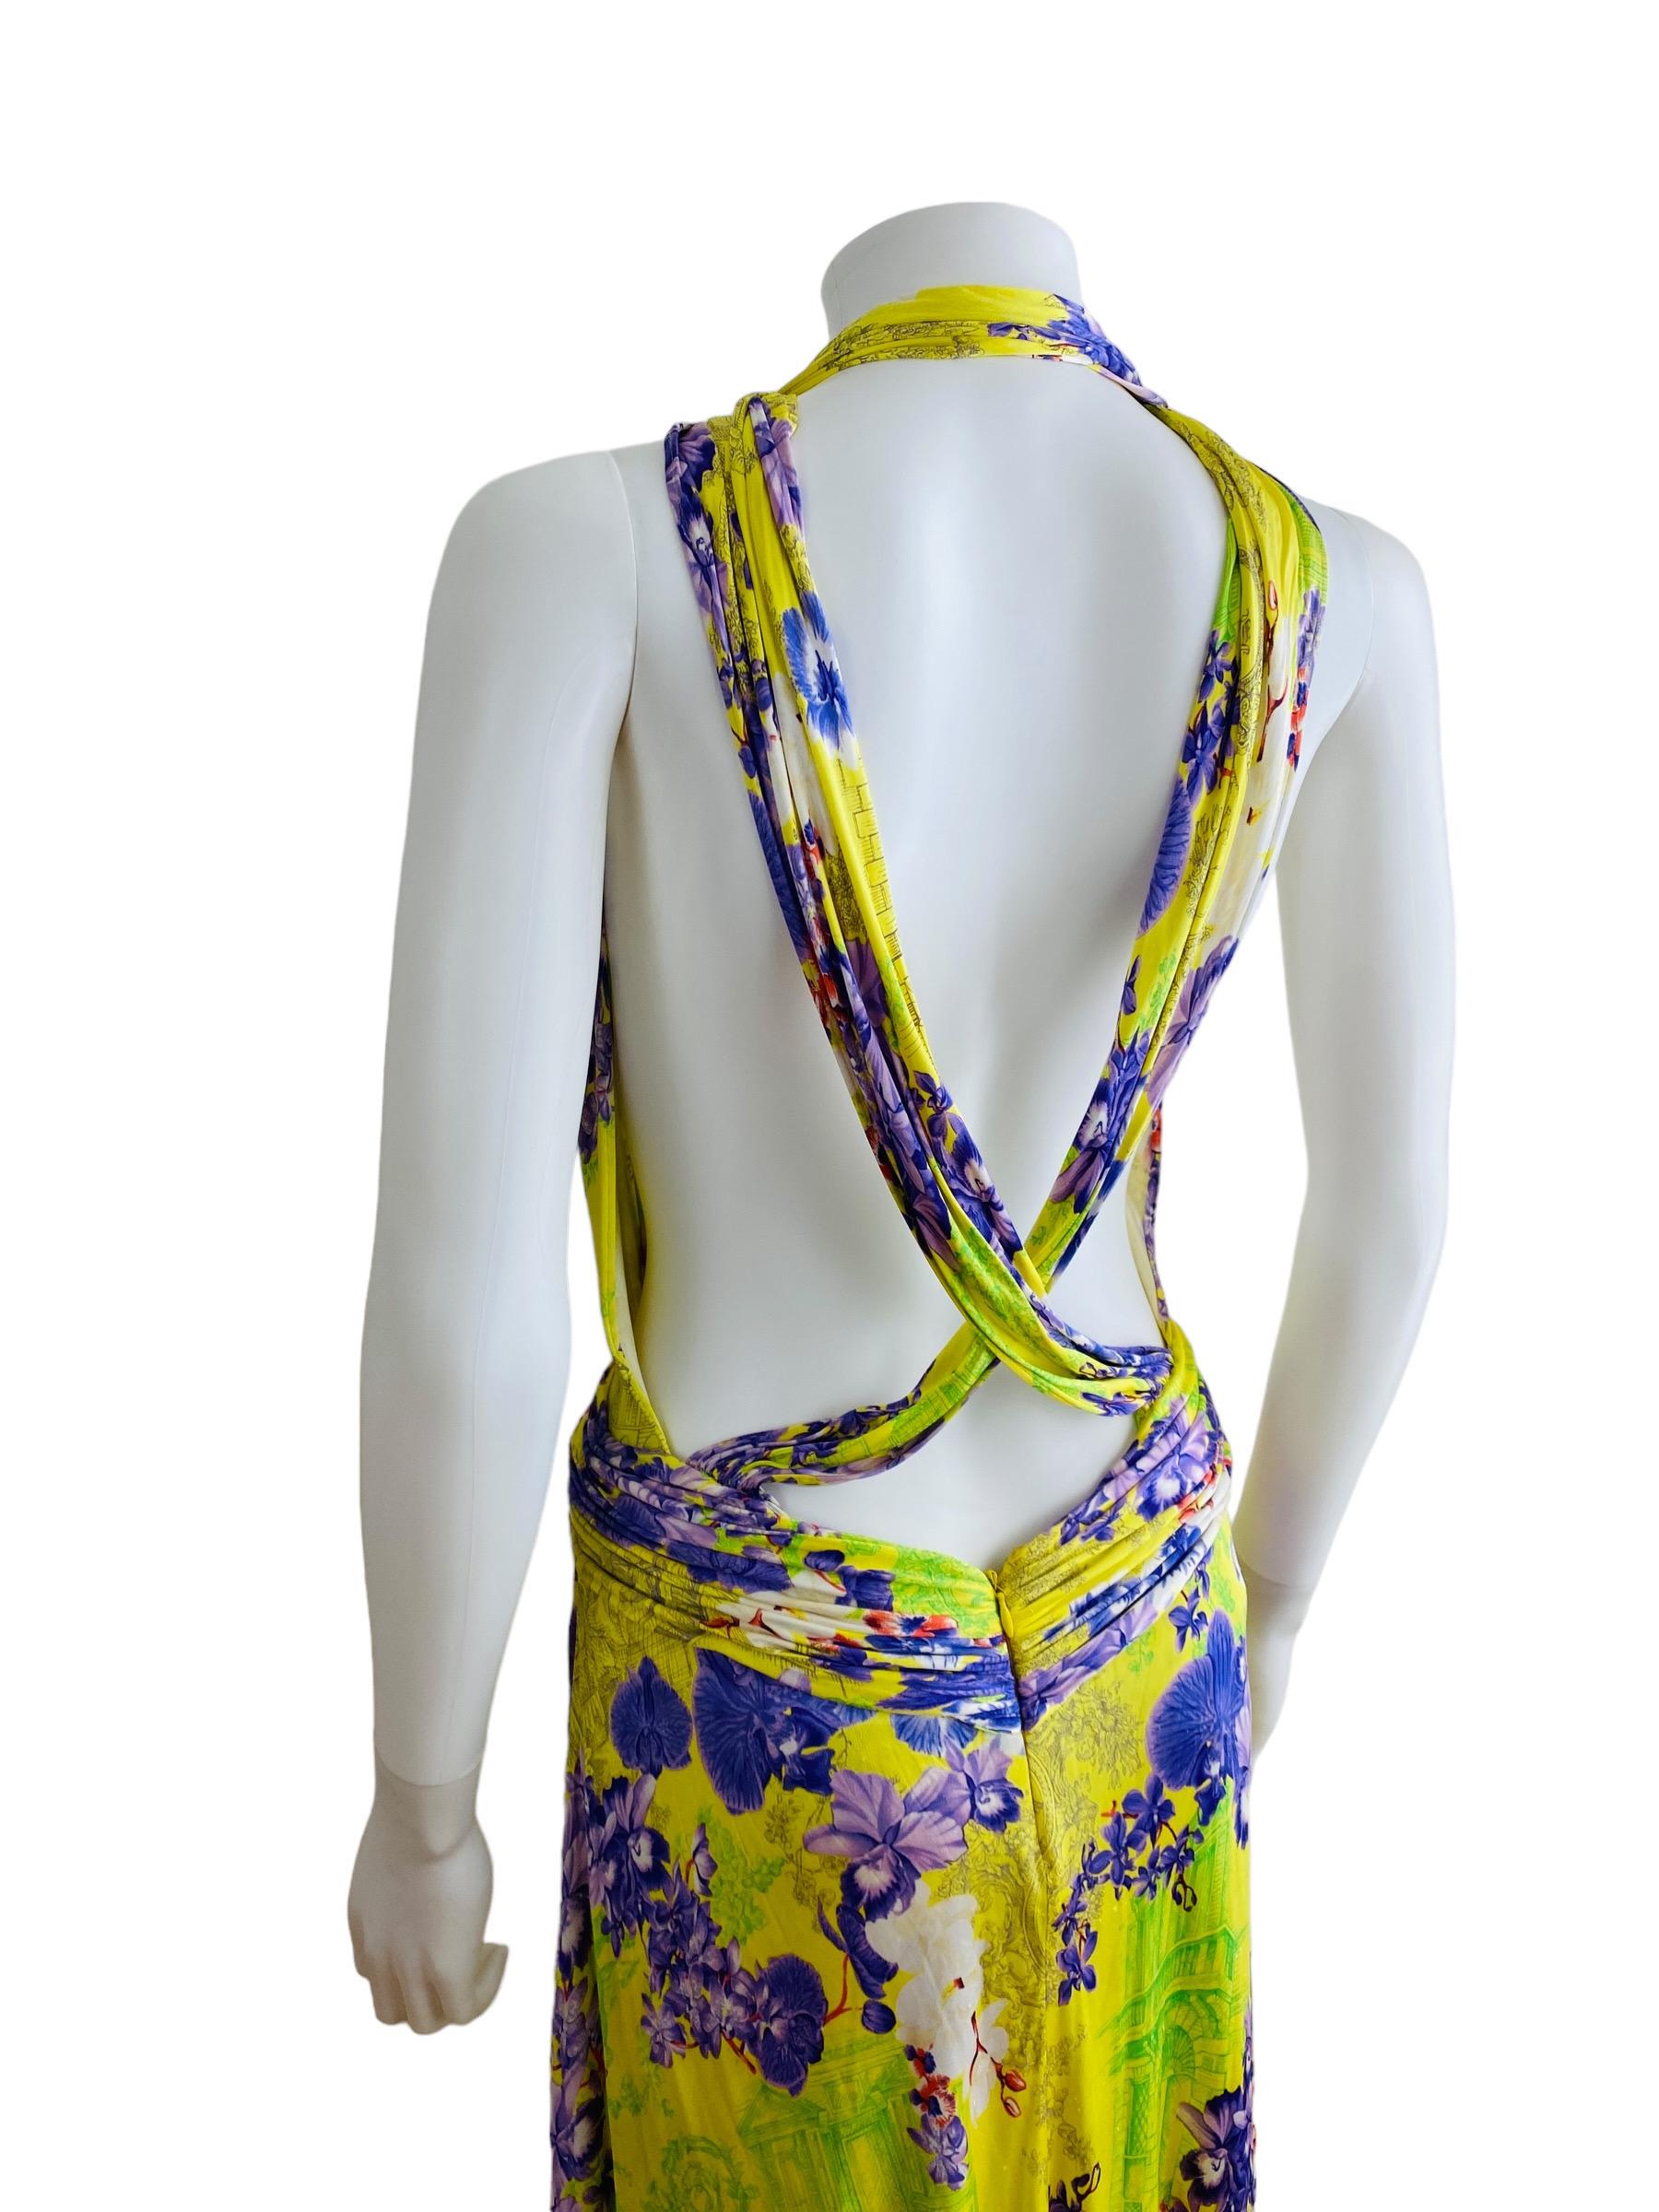 Vintage S/S 2004 Versace Dress Bright Yellow + Purple Orchid Floral Runway For Sale 10